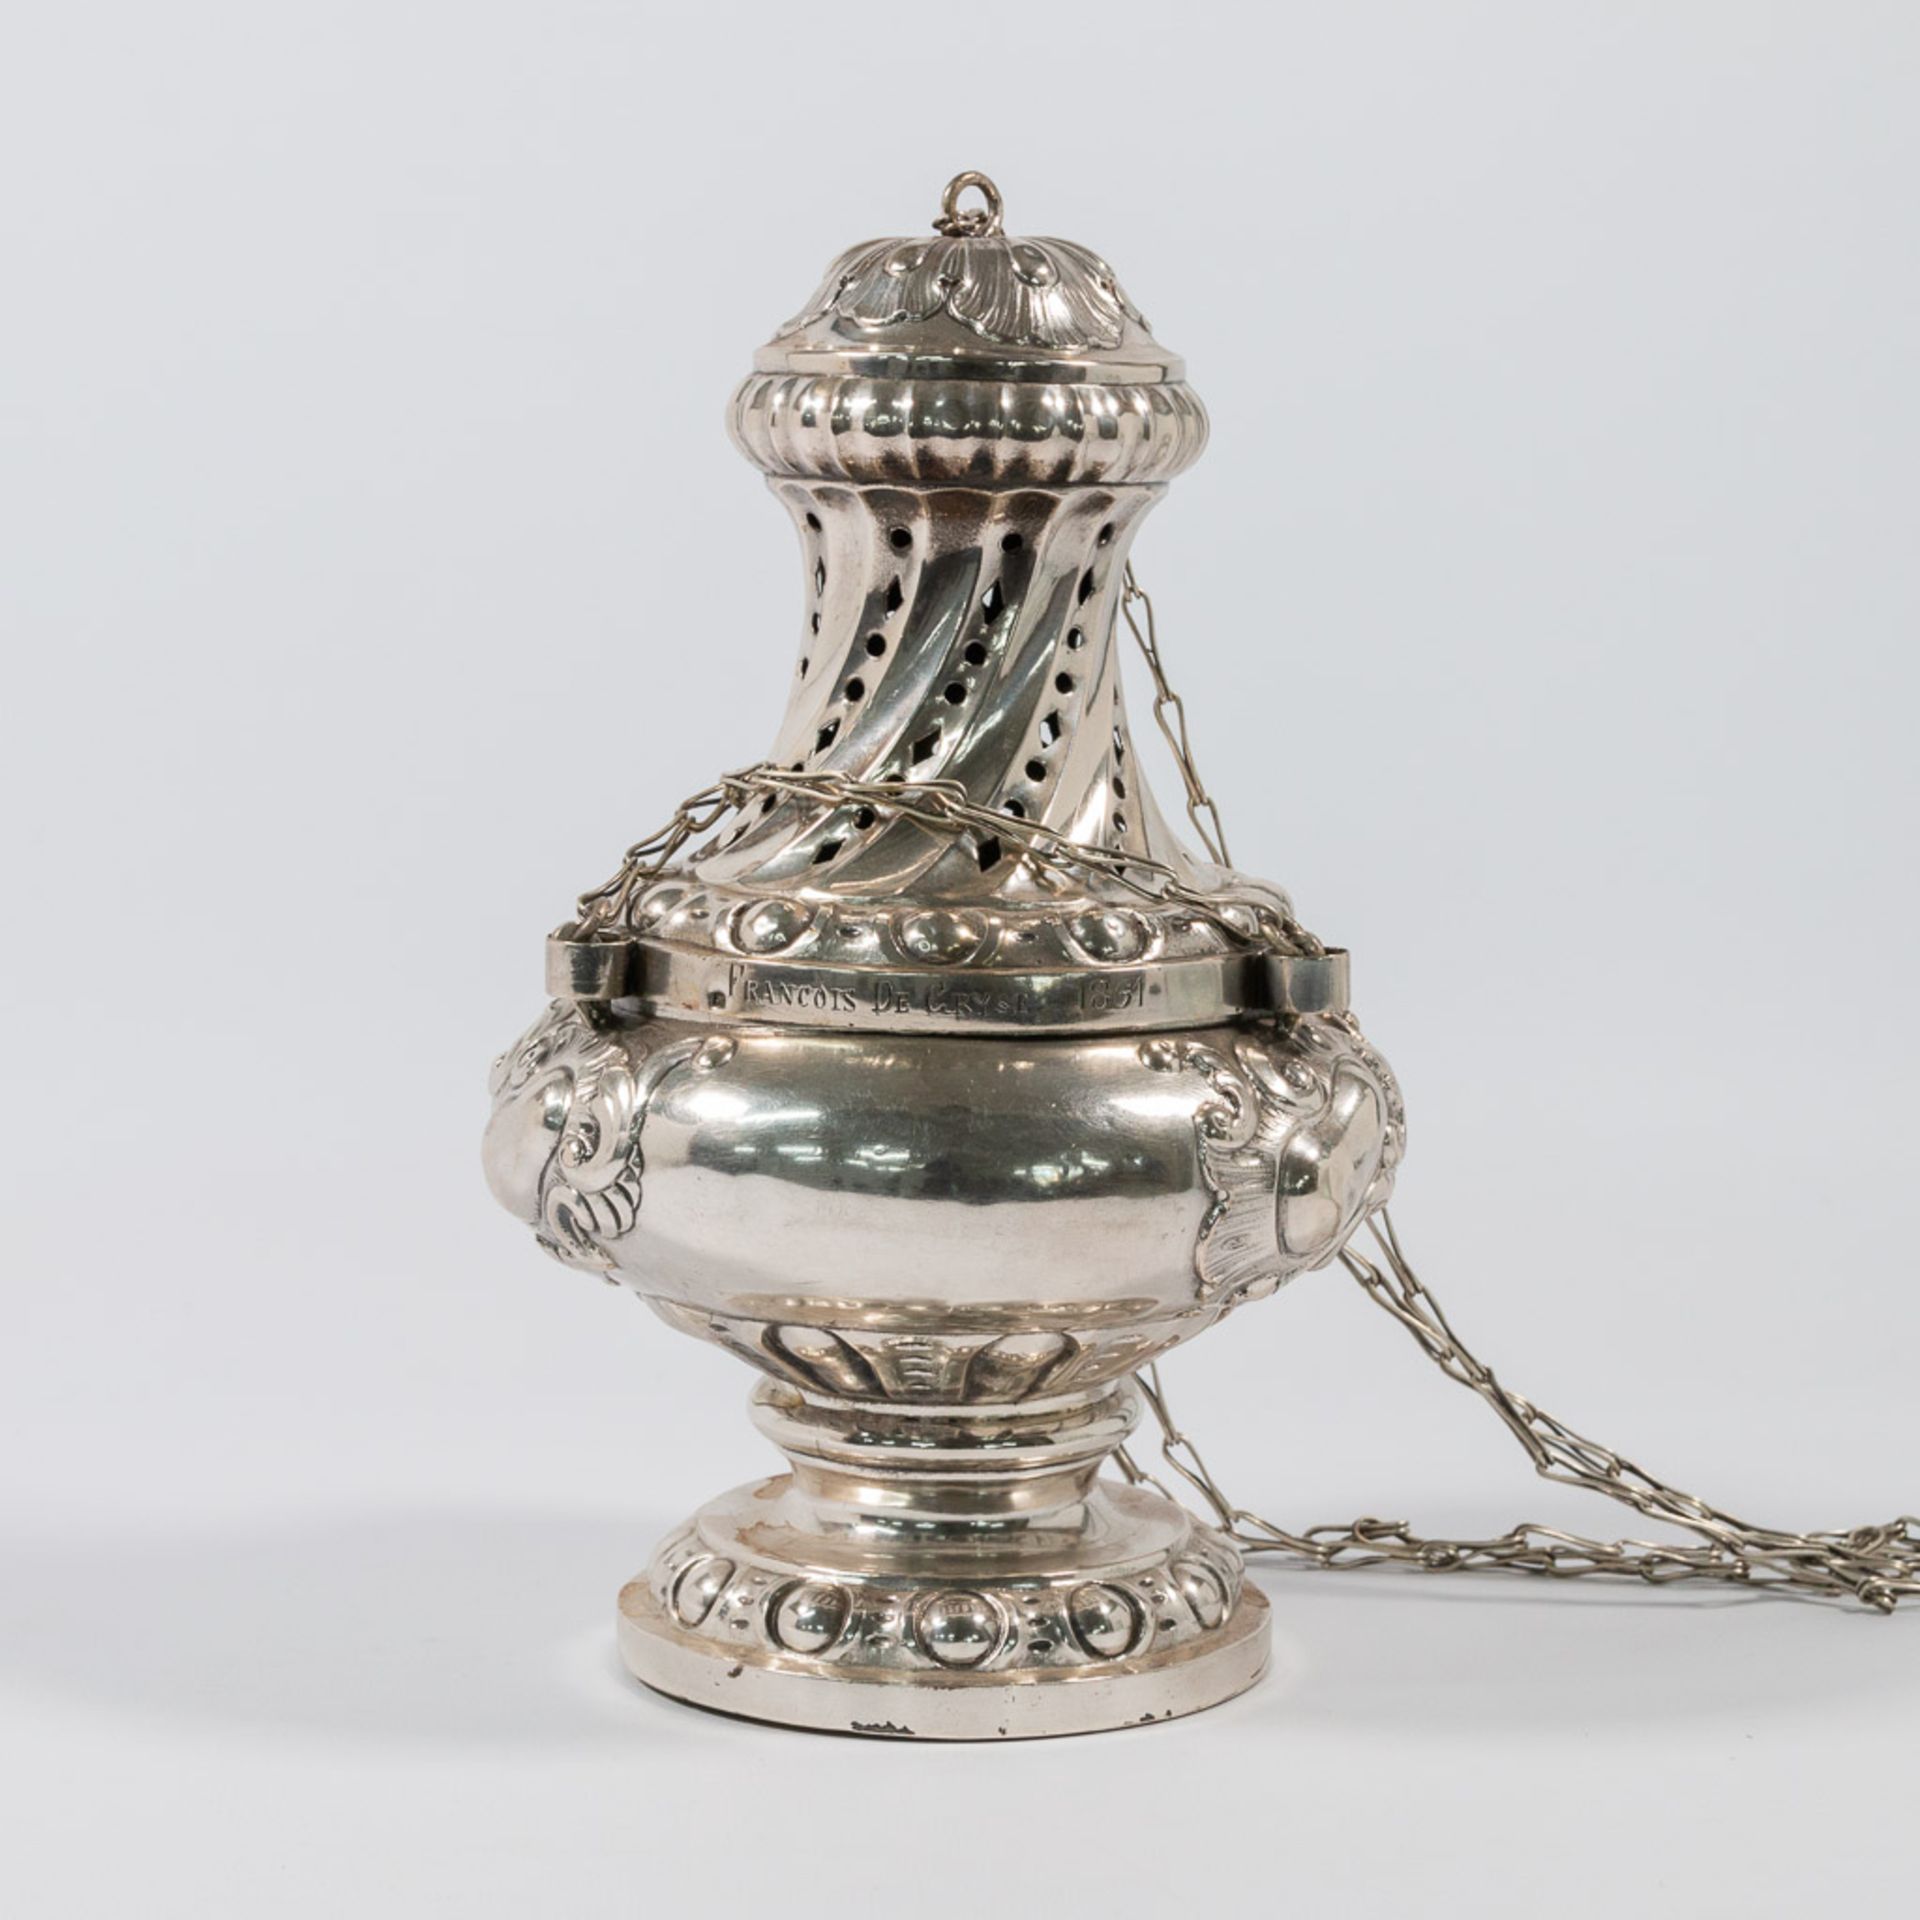 A silver Insence burner and Insence jar. - Image 17 of 39